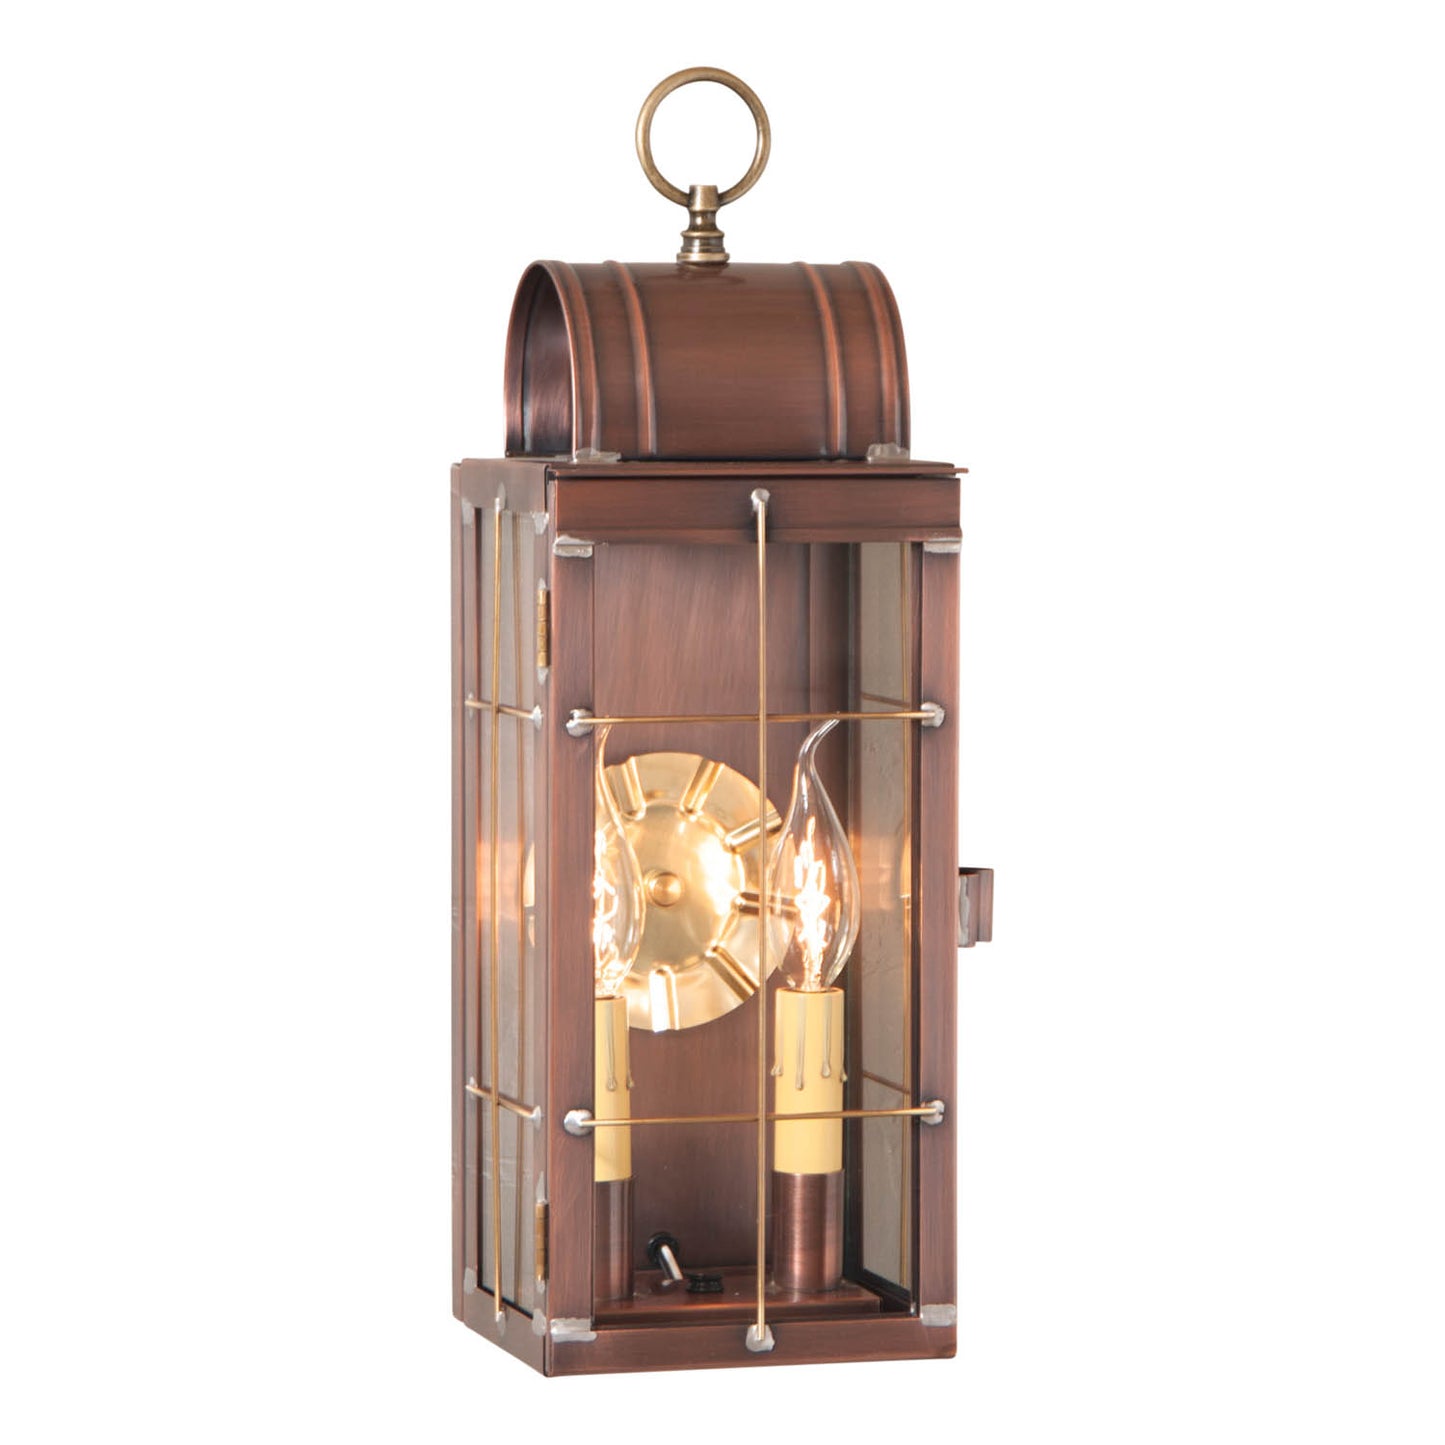 Hand-Crafted | Colonial | Arch Lantern